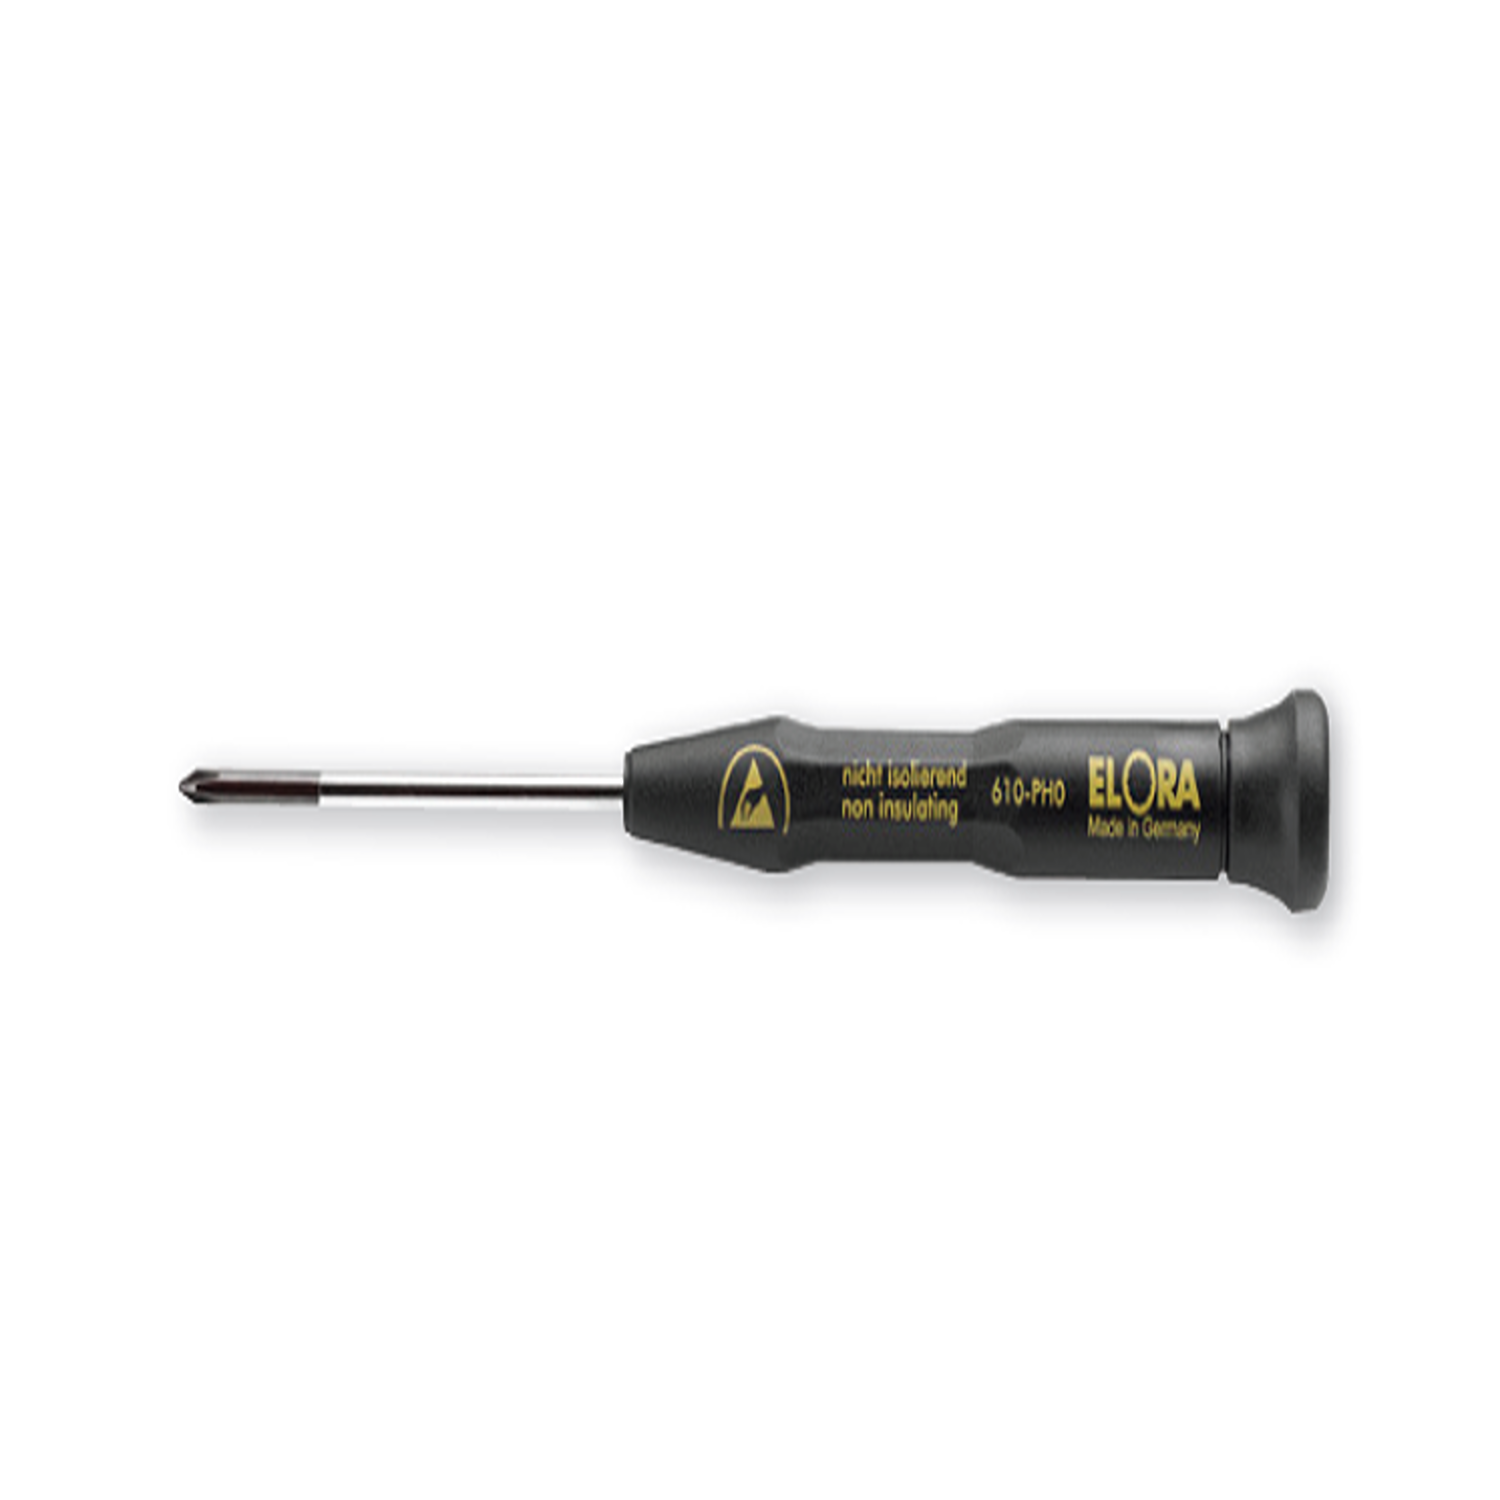 ELORA 610-PH ESD Electronic Screwdriver ESD (ELORA Tools) - Premium Screwdriver from ELORA - Shop now at Yew Aik.